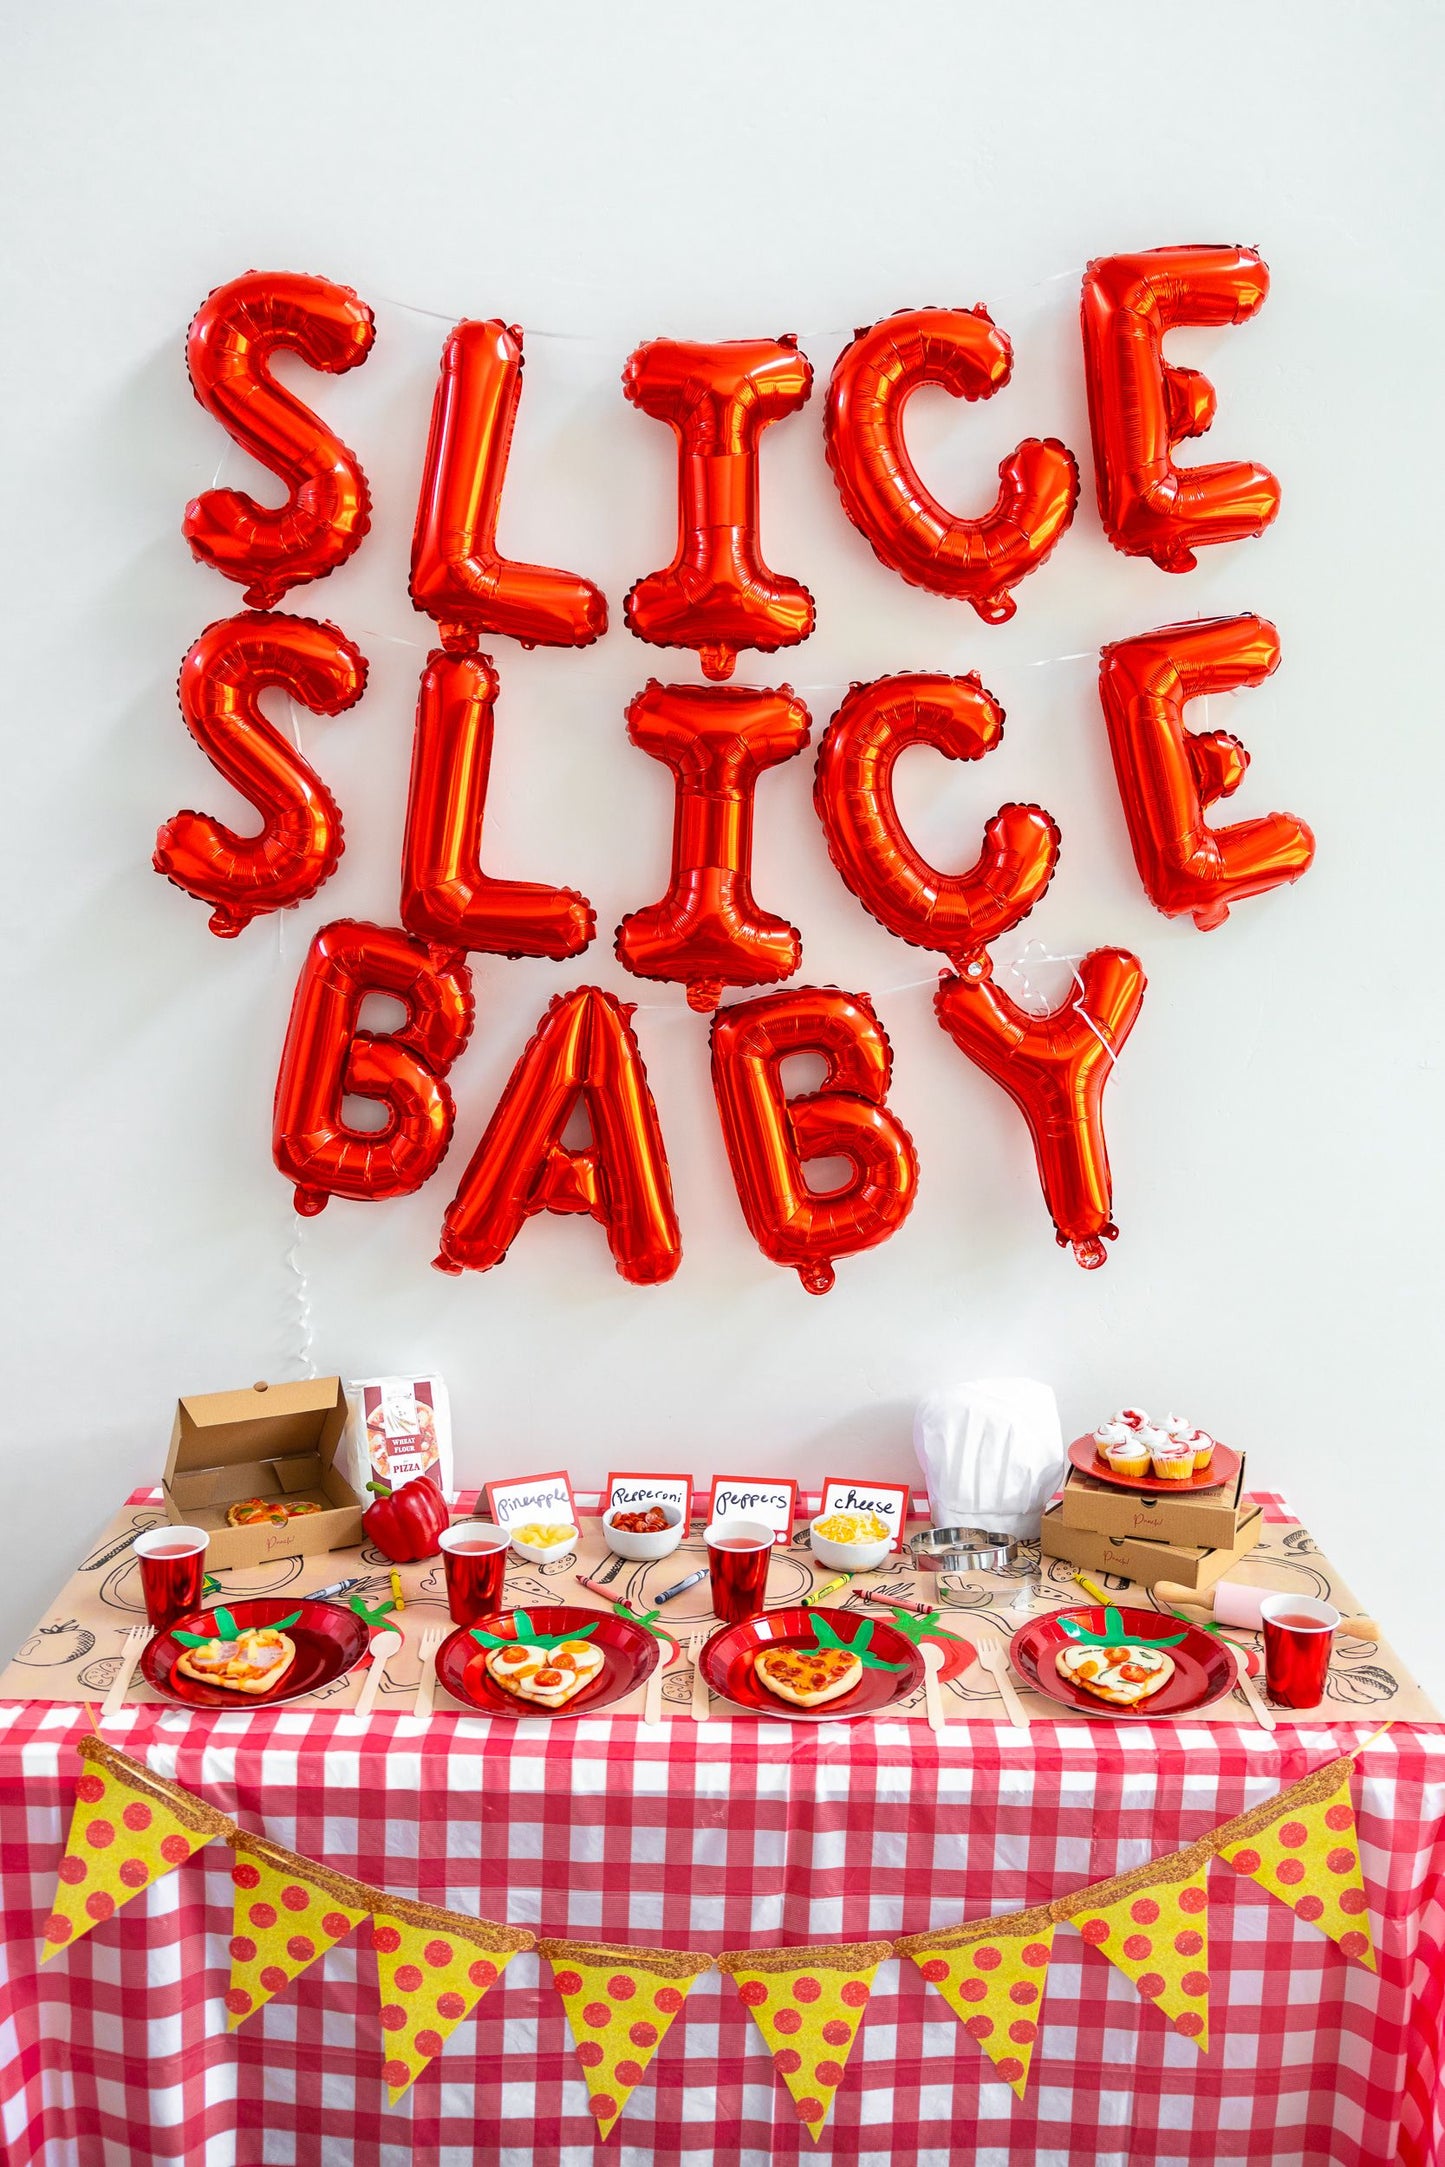 Red Gingham Tablecloth